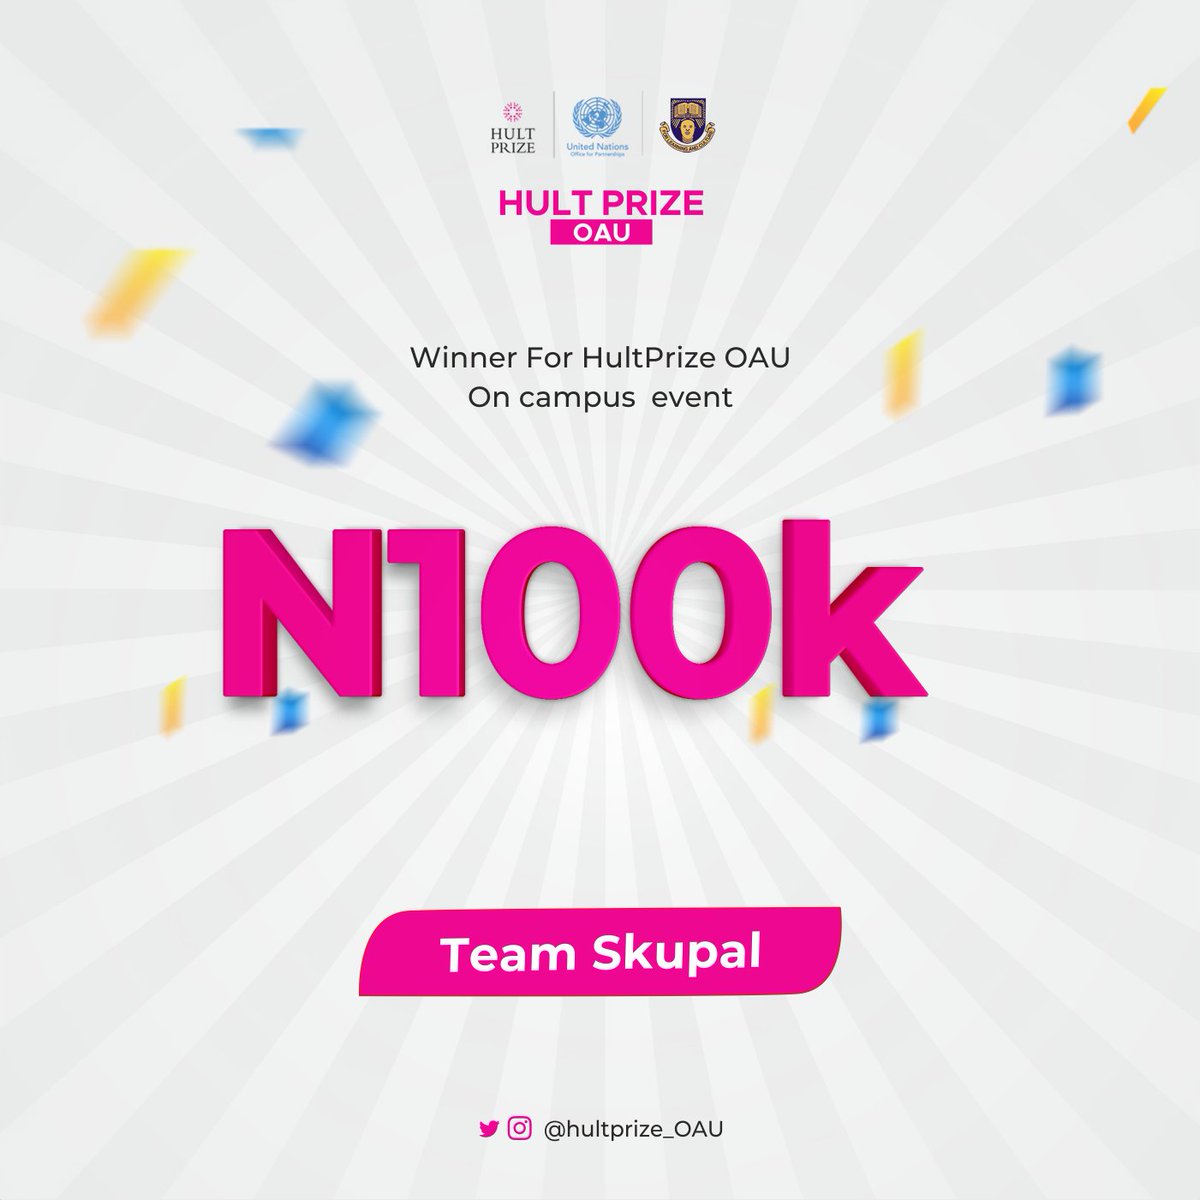 HULTPRIZE OAU On- Campus event was a success 🥳🥳🔥 and we have our winner Team skupal🔥🔥 
To every team who participated y'all really did well🔊💯 Kudos to you @HultPrize_OAU
#HultPrizeOAU
#oau 
#OAUEvents